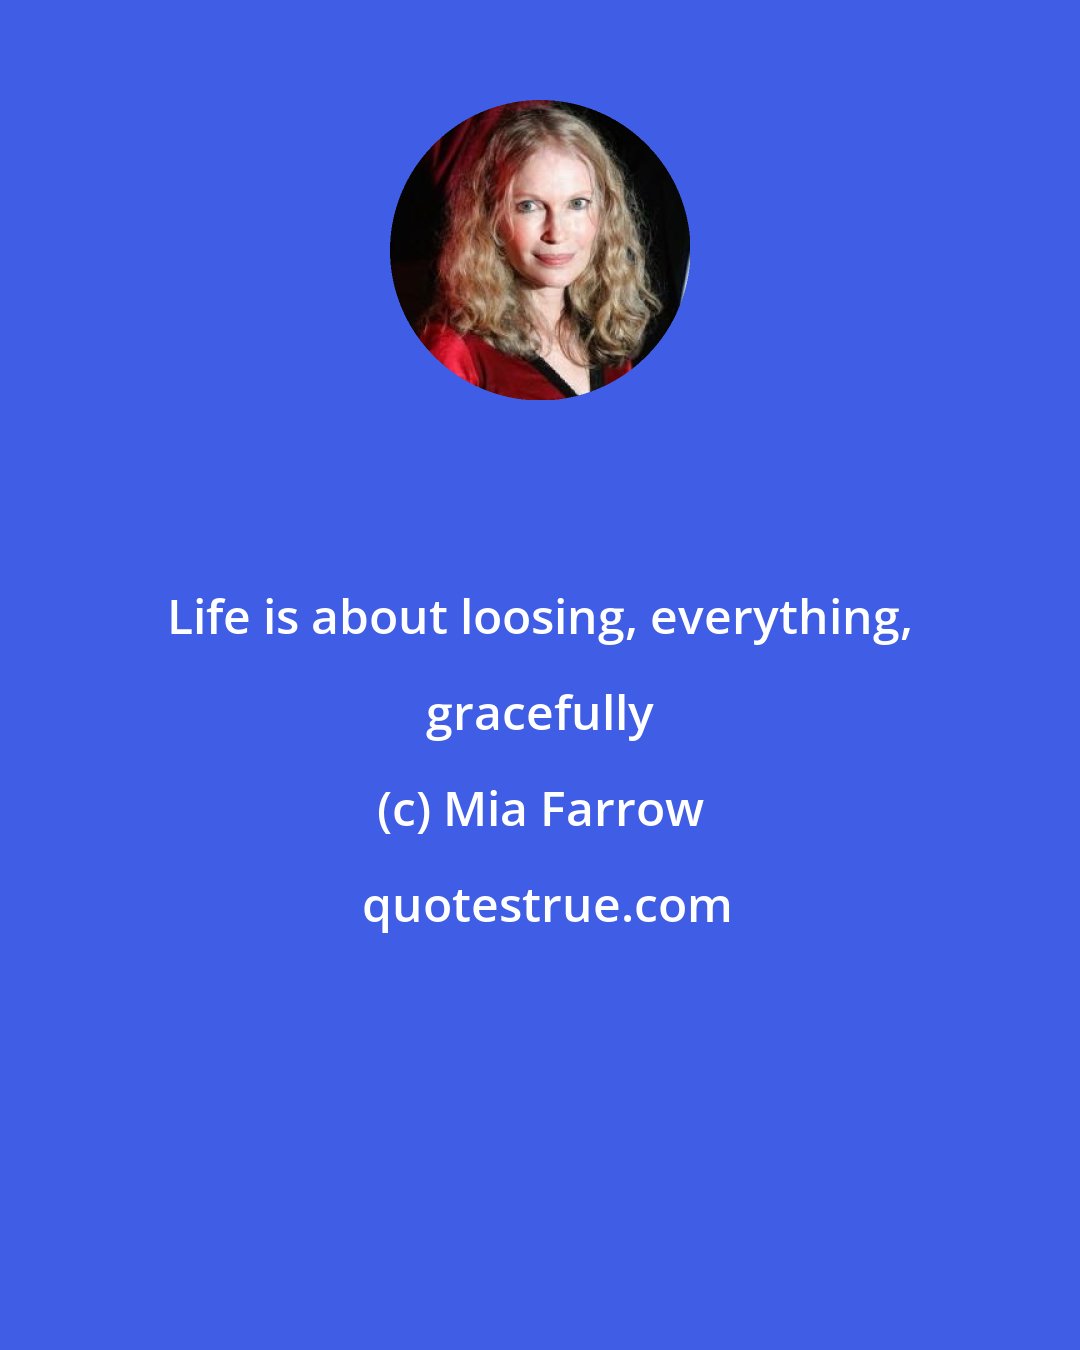 Mia Farrow: Life is about loosing, everything, gracefully